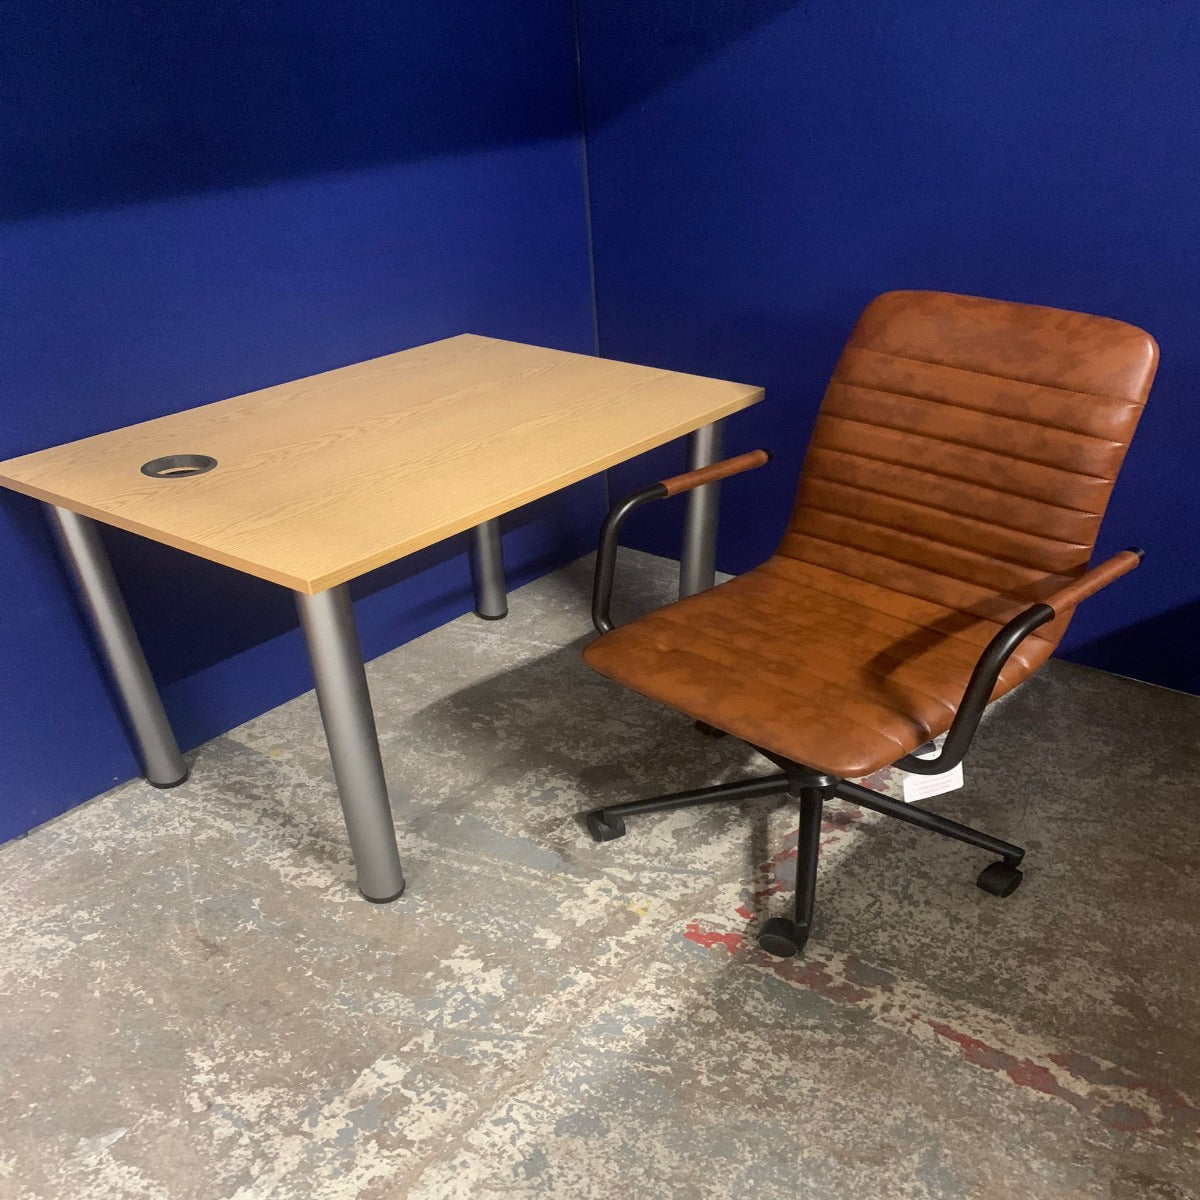 BUNDLE DEAL: Beat leather swivel chair and study desk